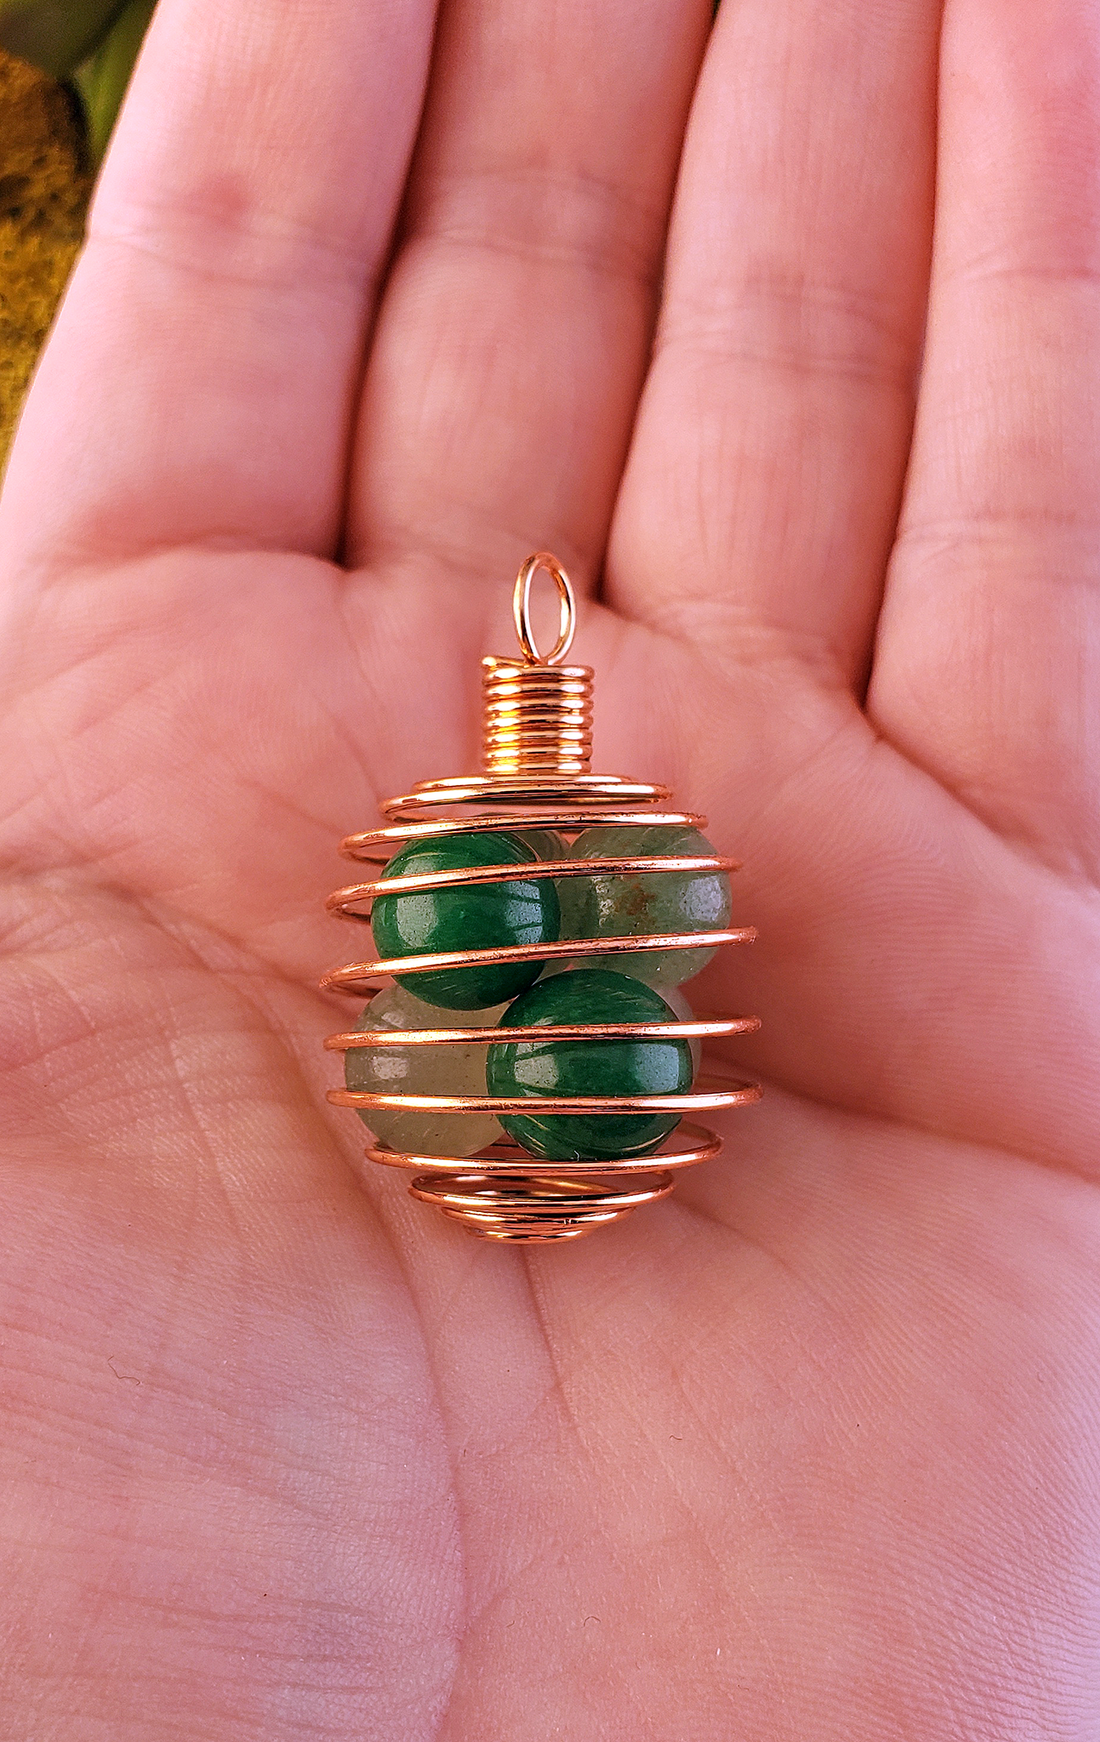 Copper-Colored Metal Spiral Cage Ornament Pendant - Perfect for Holding Gemstones or Orbs! - With 10mm Green Aventurine Orbs on Display